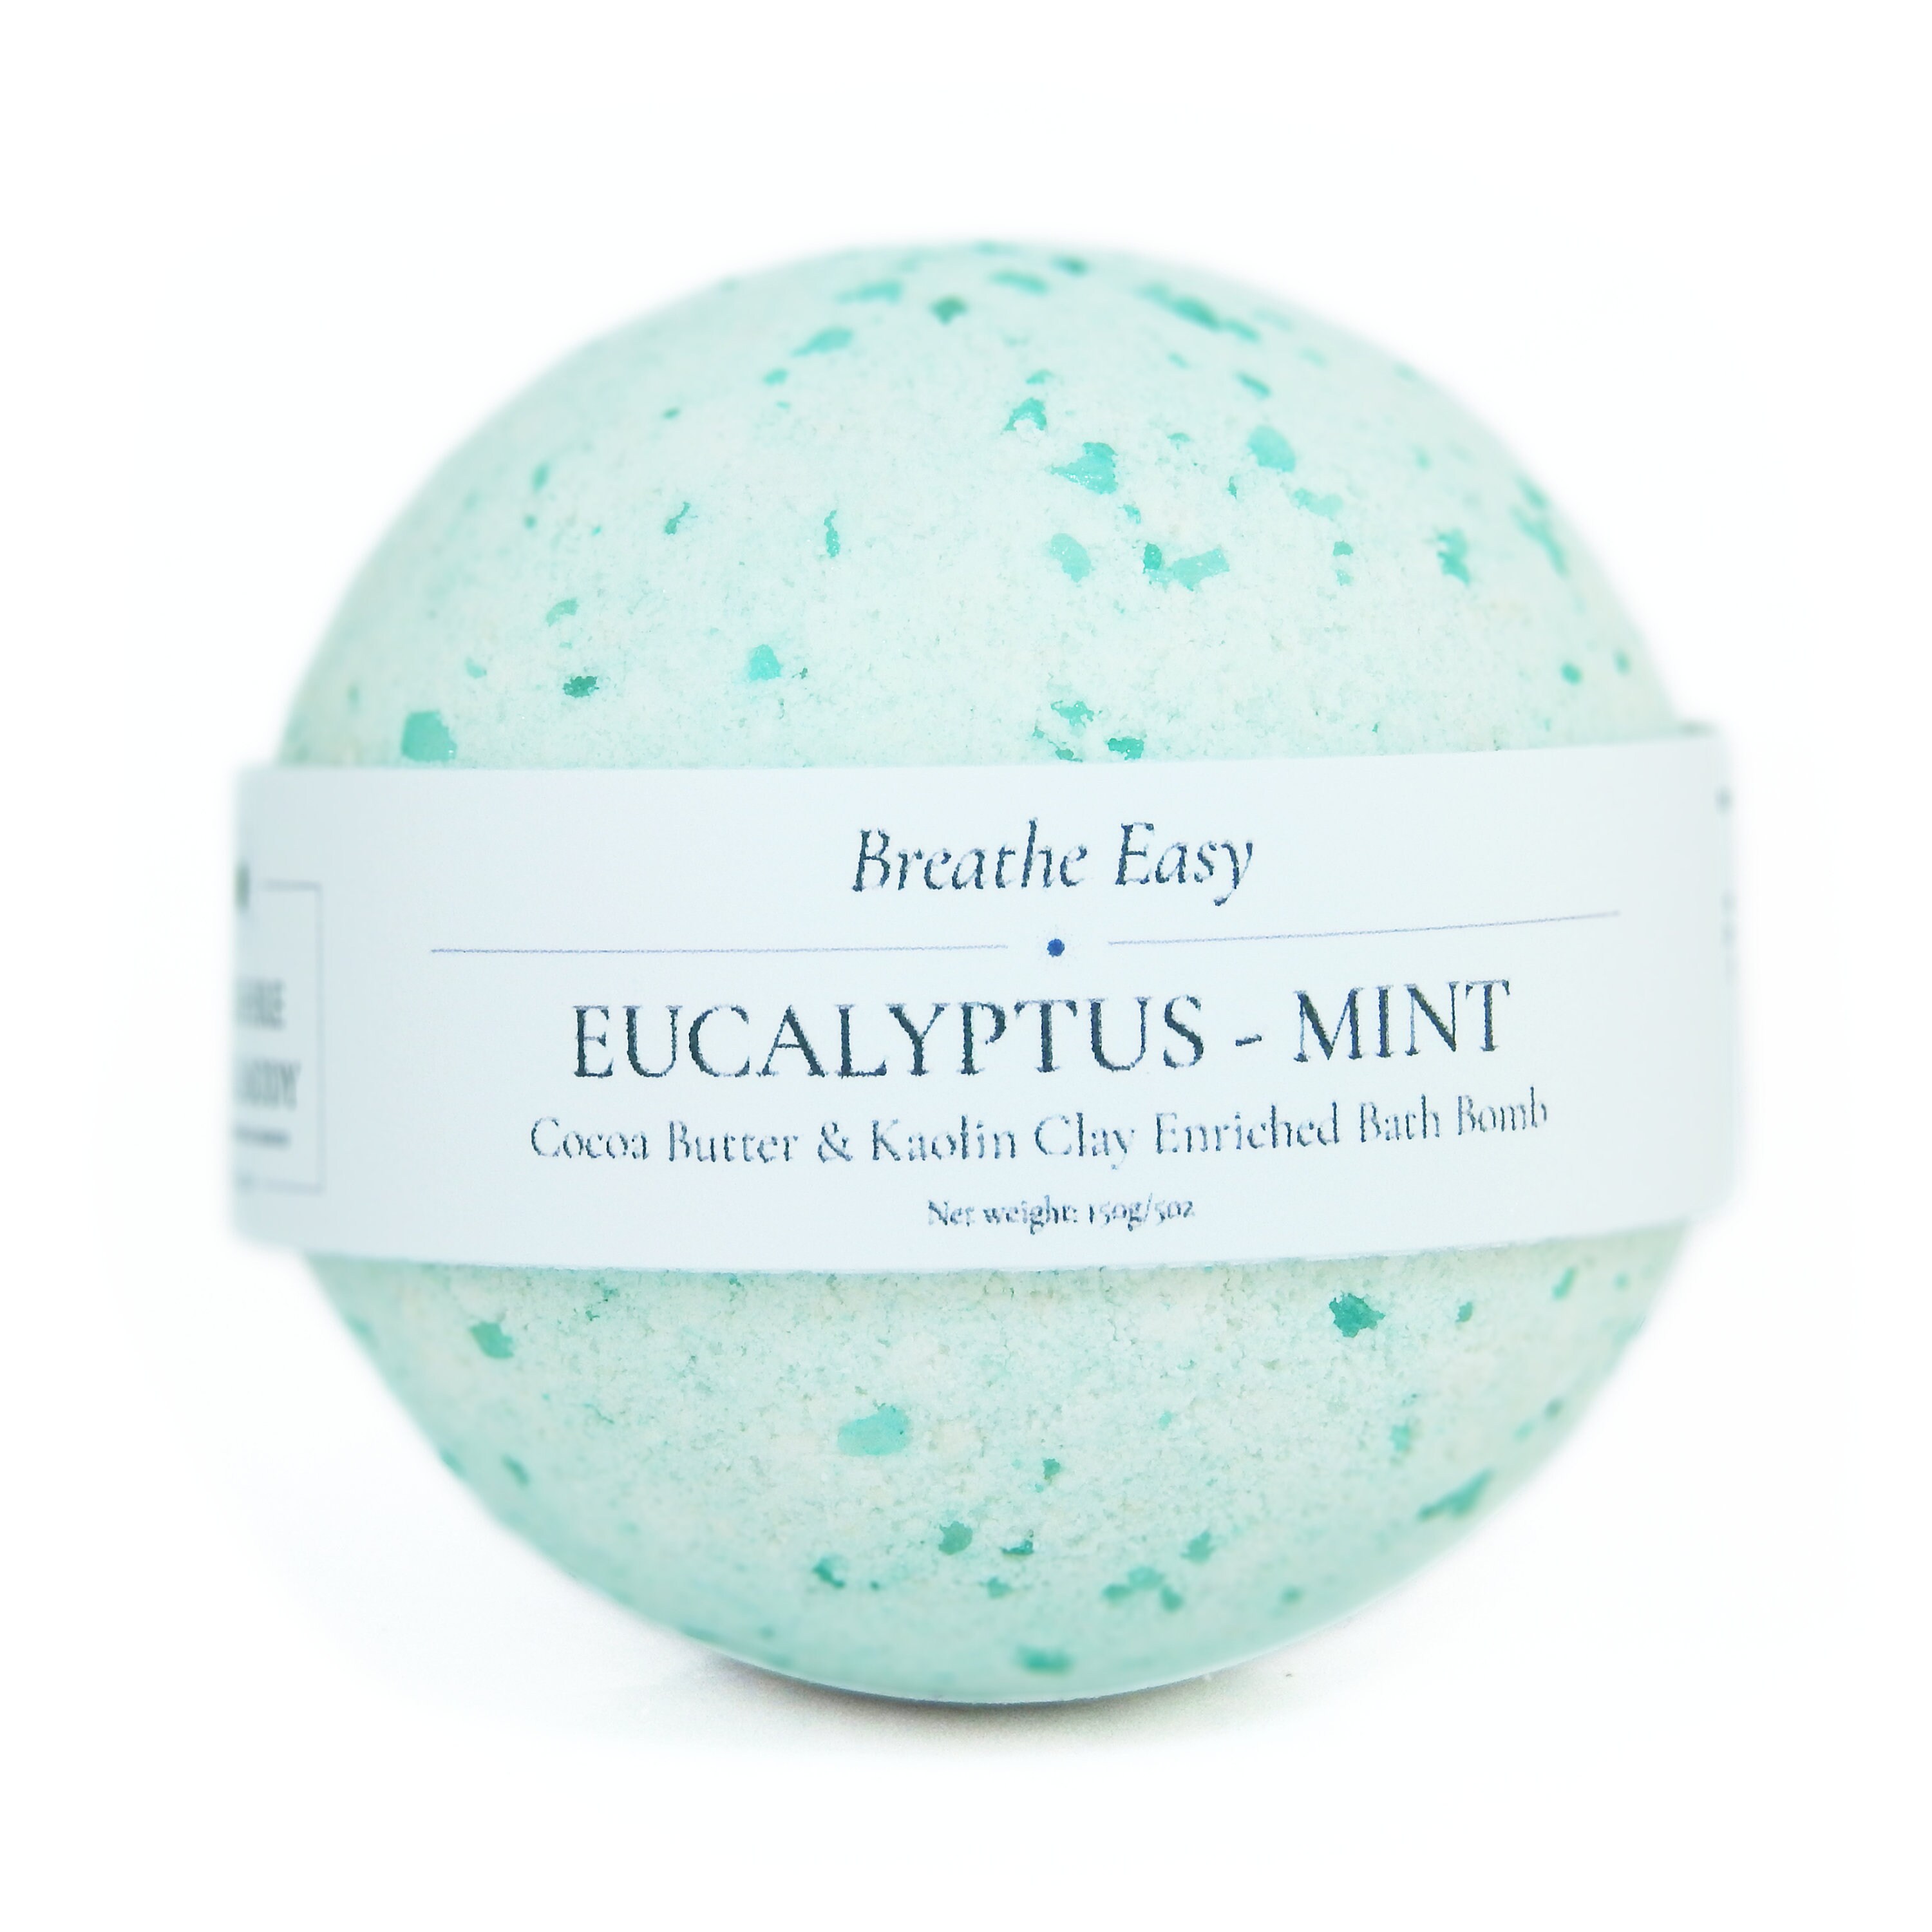 Eucalyptus Mint Bath Bomb Enriched with Cocoa Butter and | Etsy